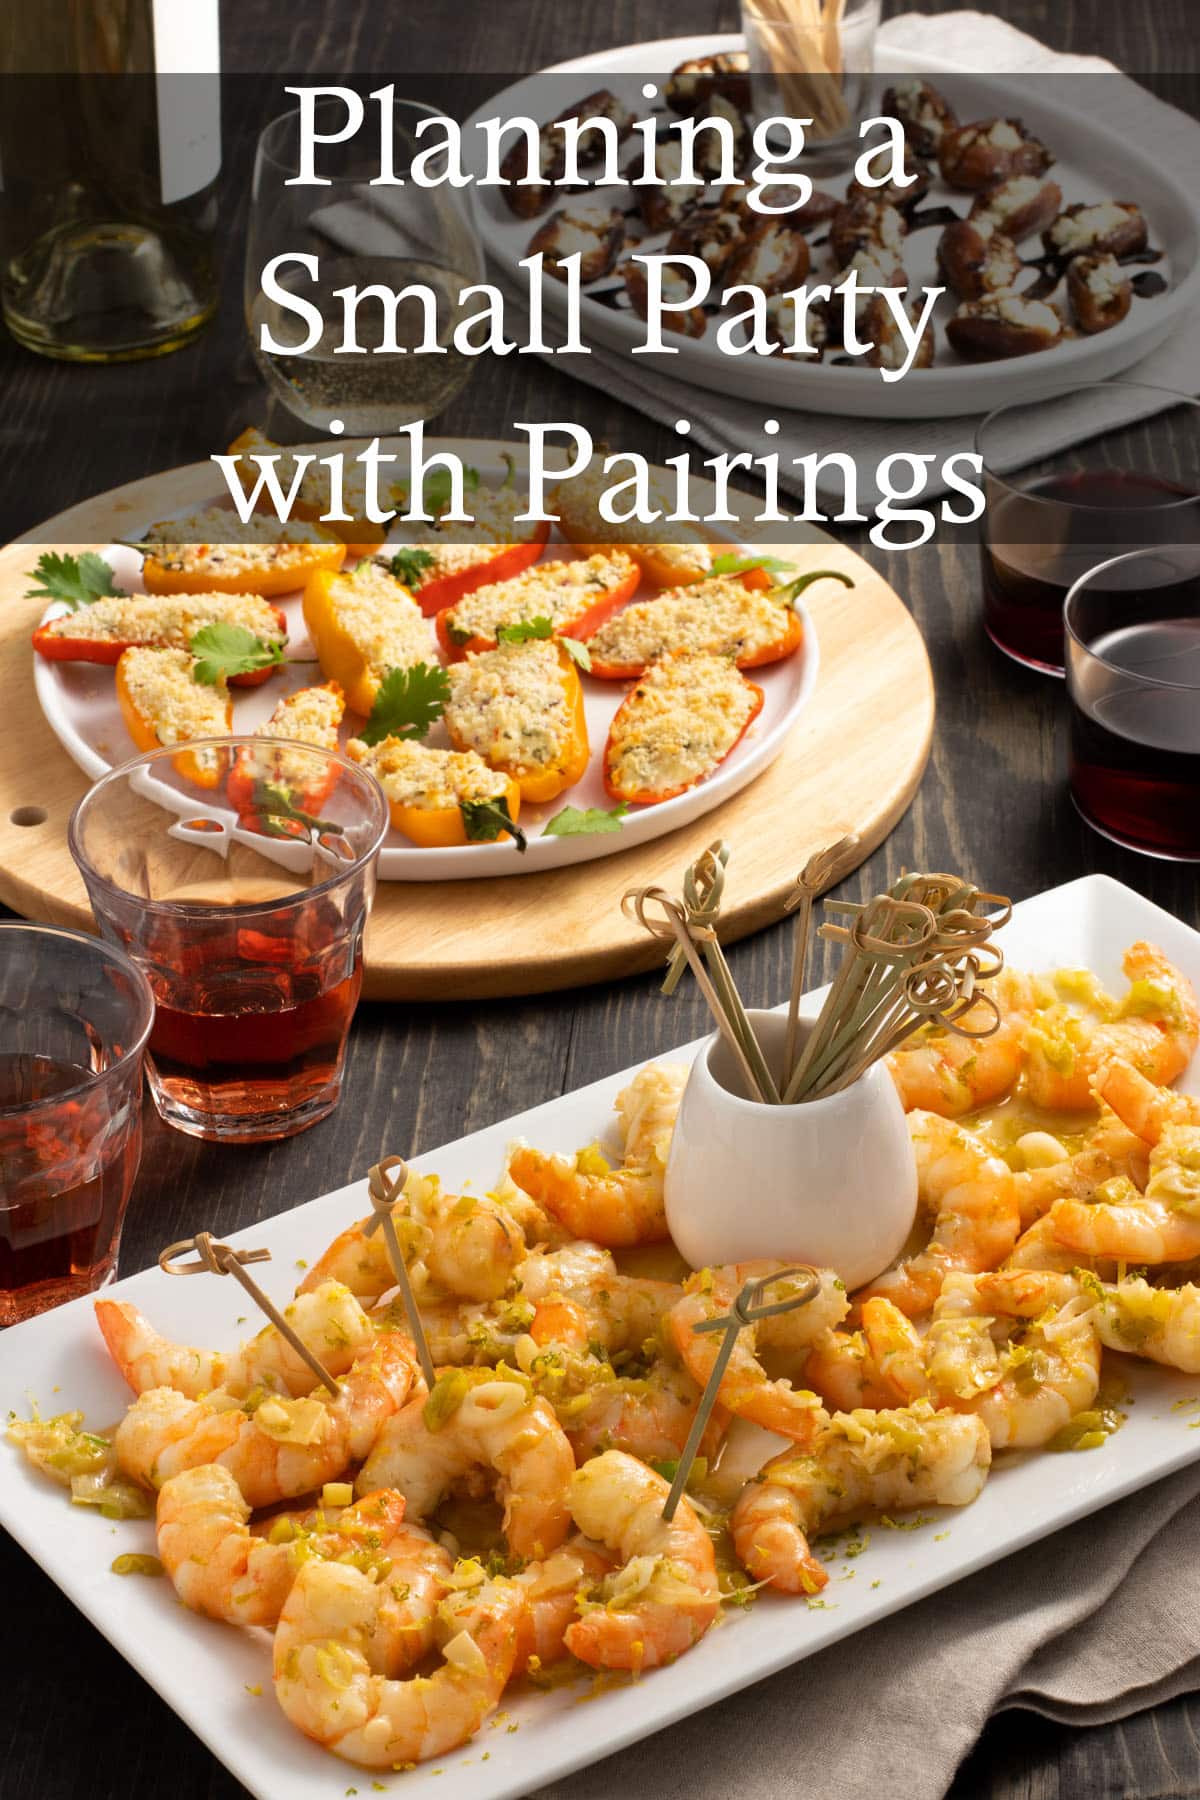 How to Plan a Small Party with Wine Pairings